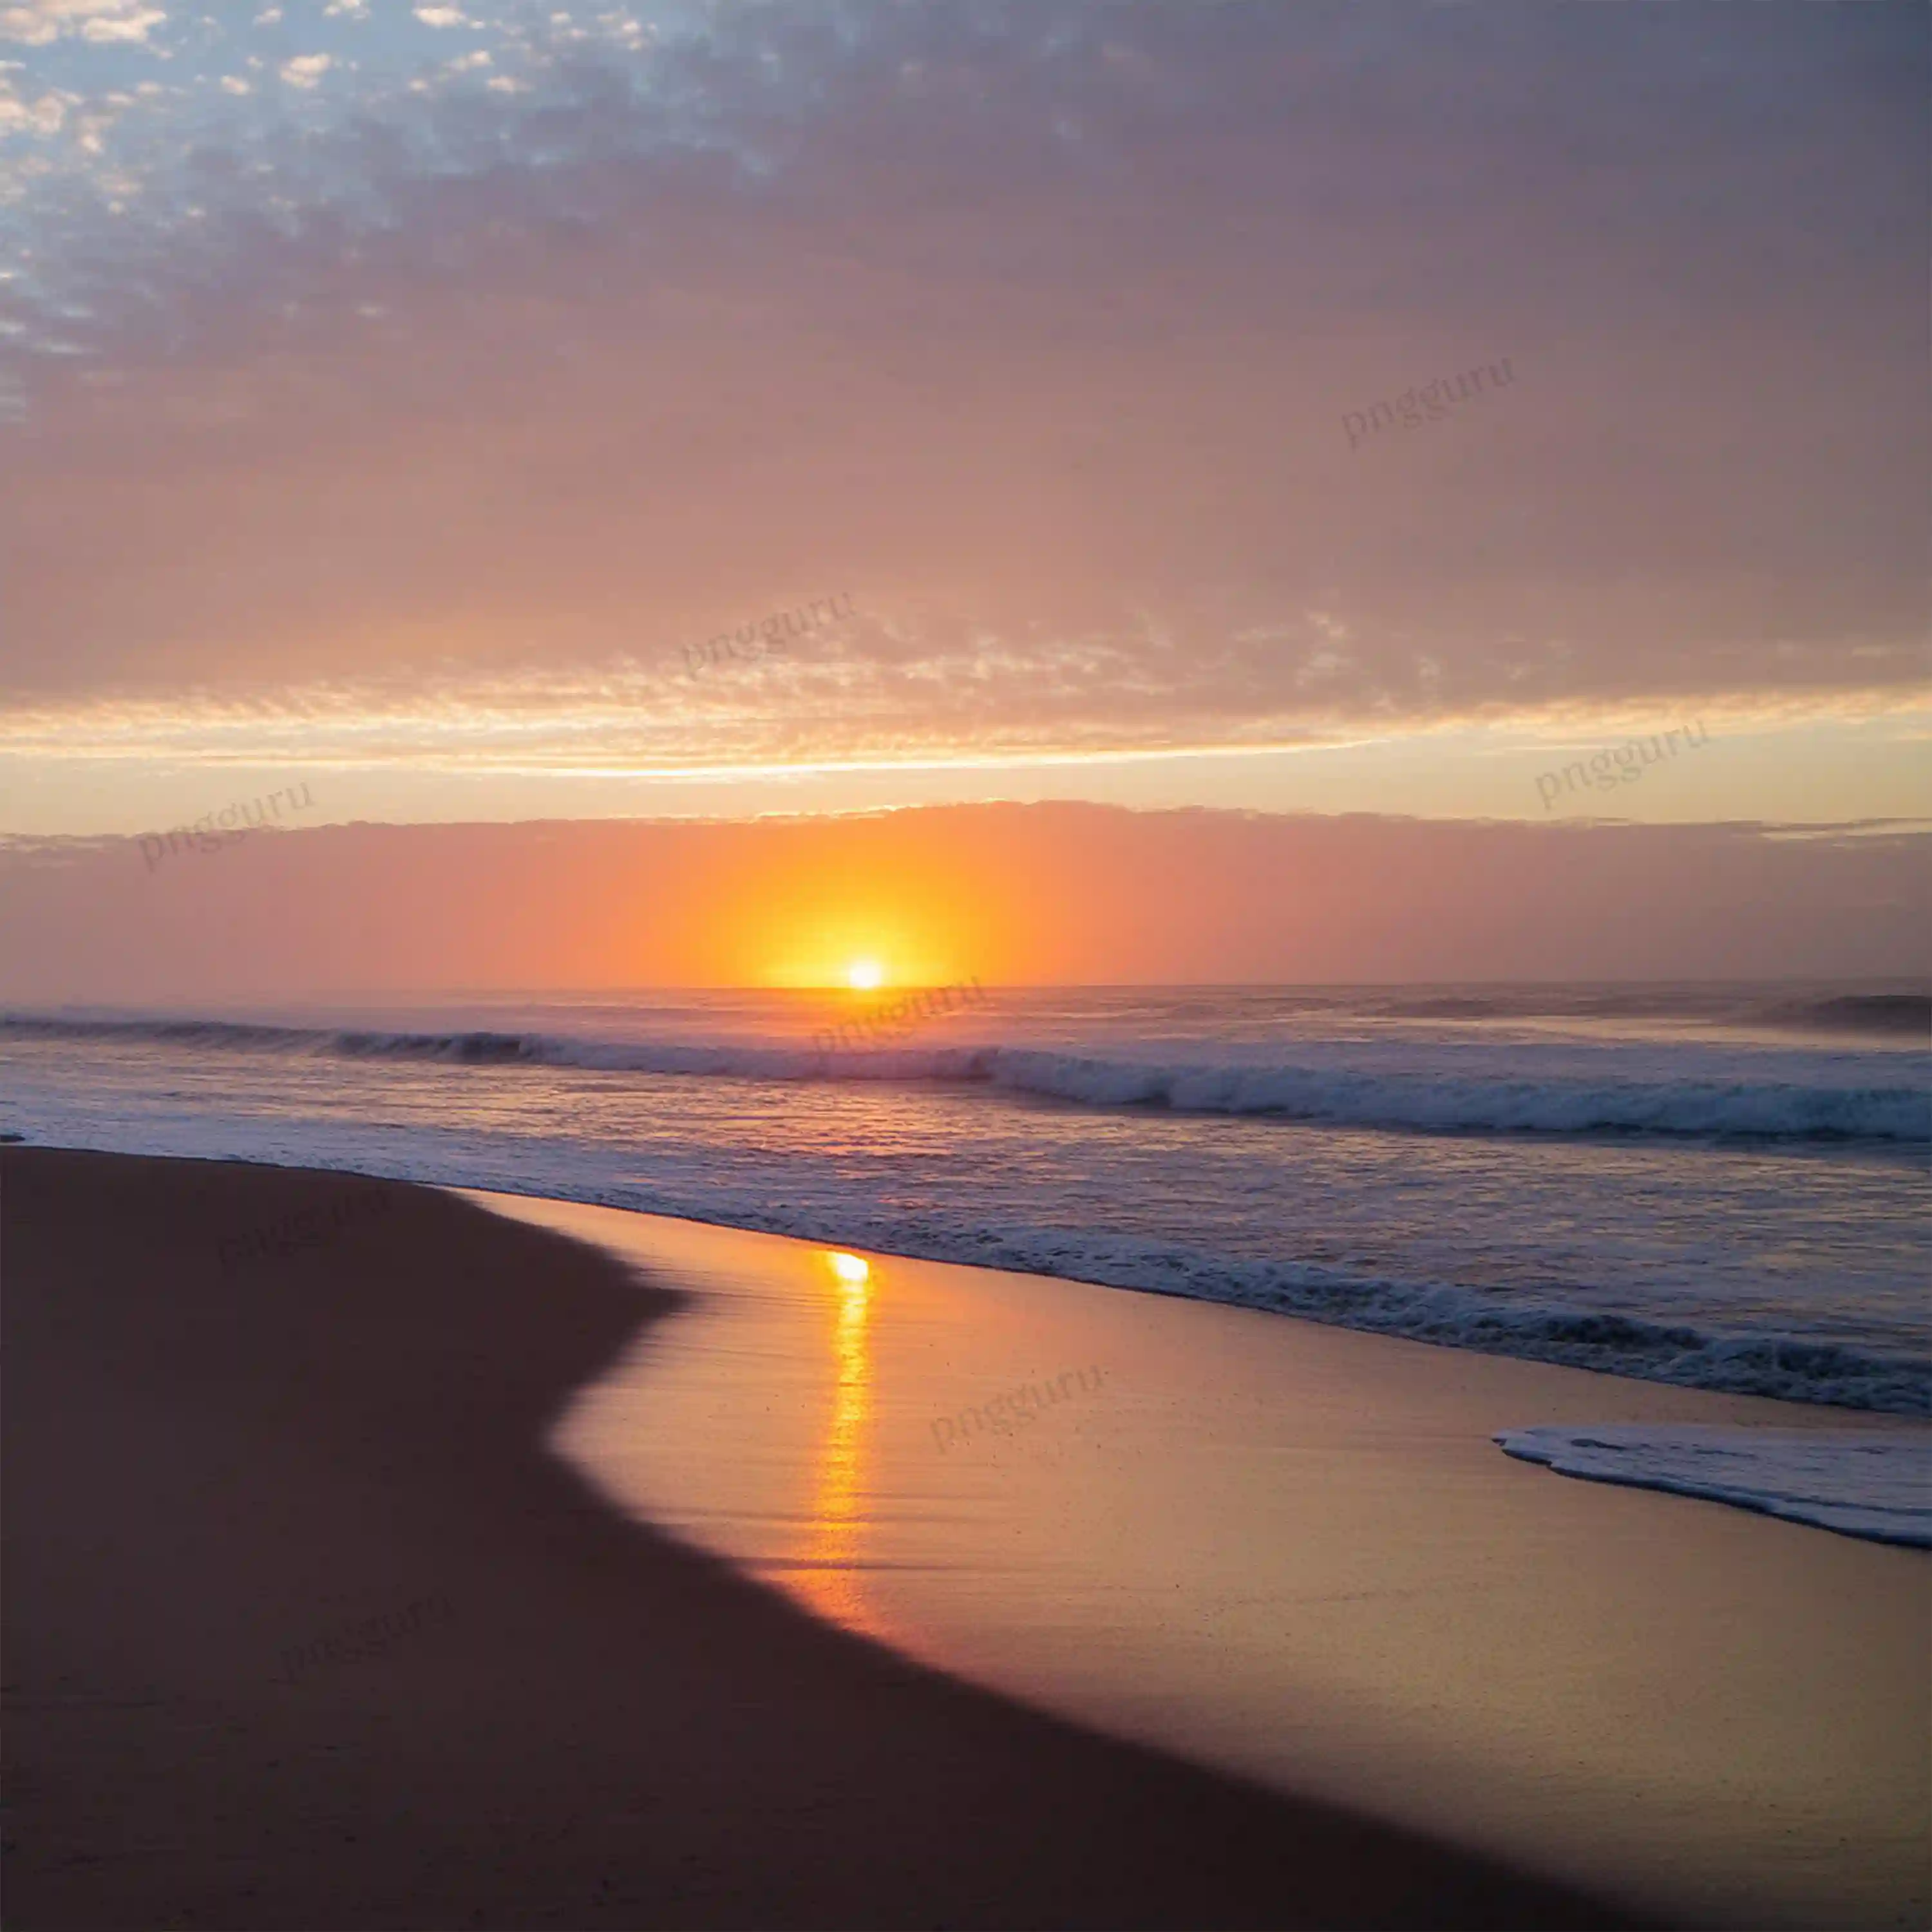 A sunrise on the beach with waves and sand